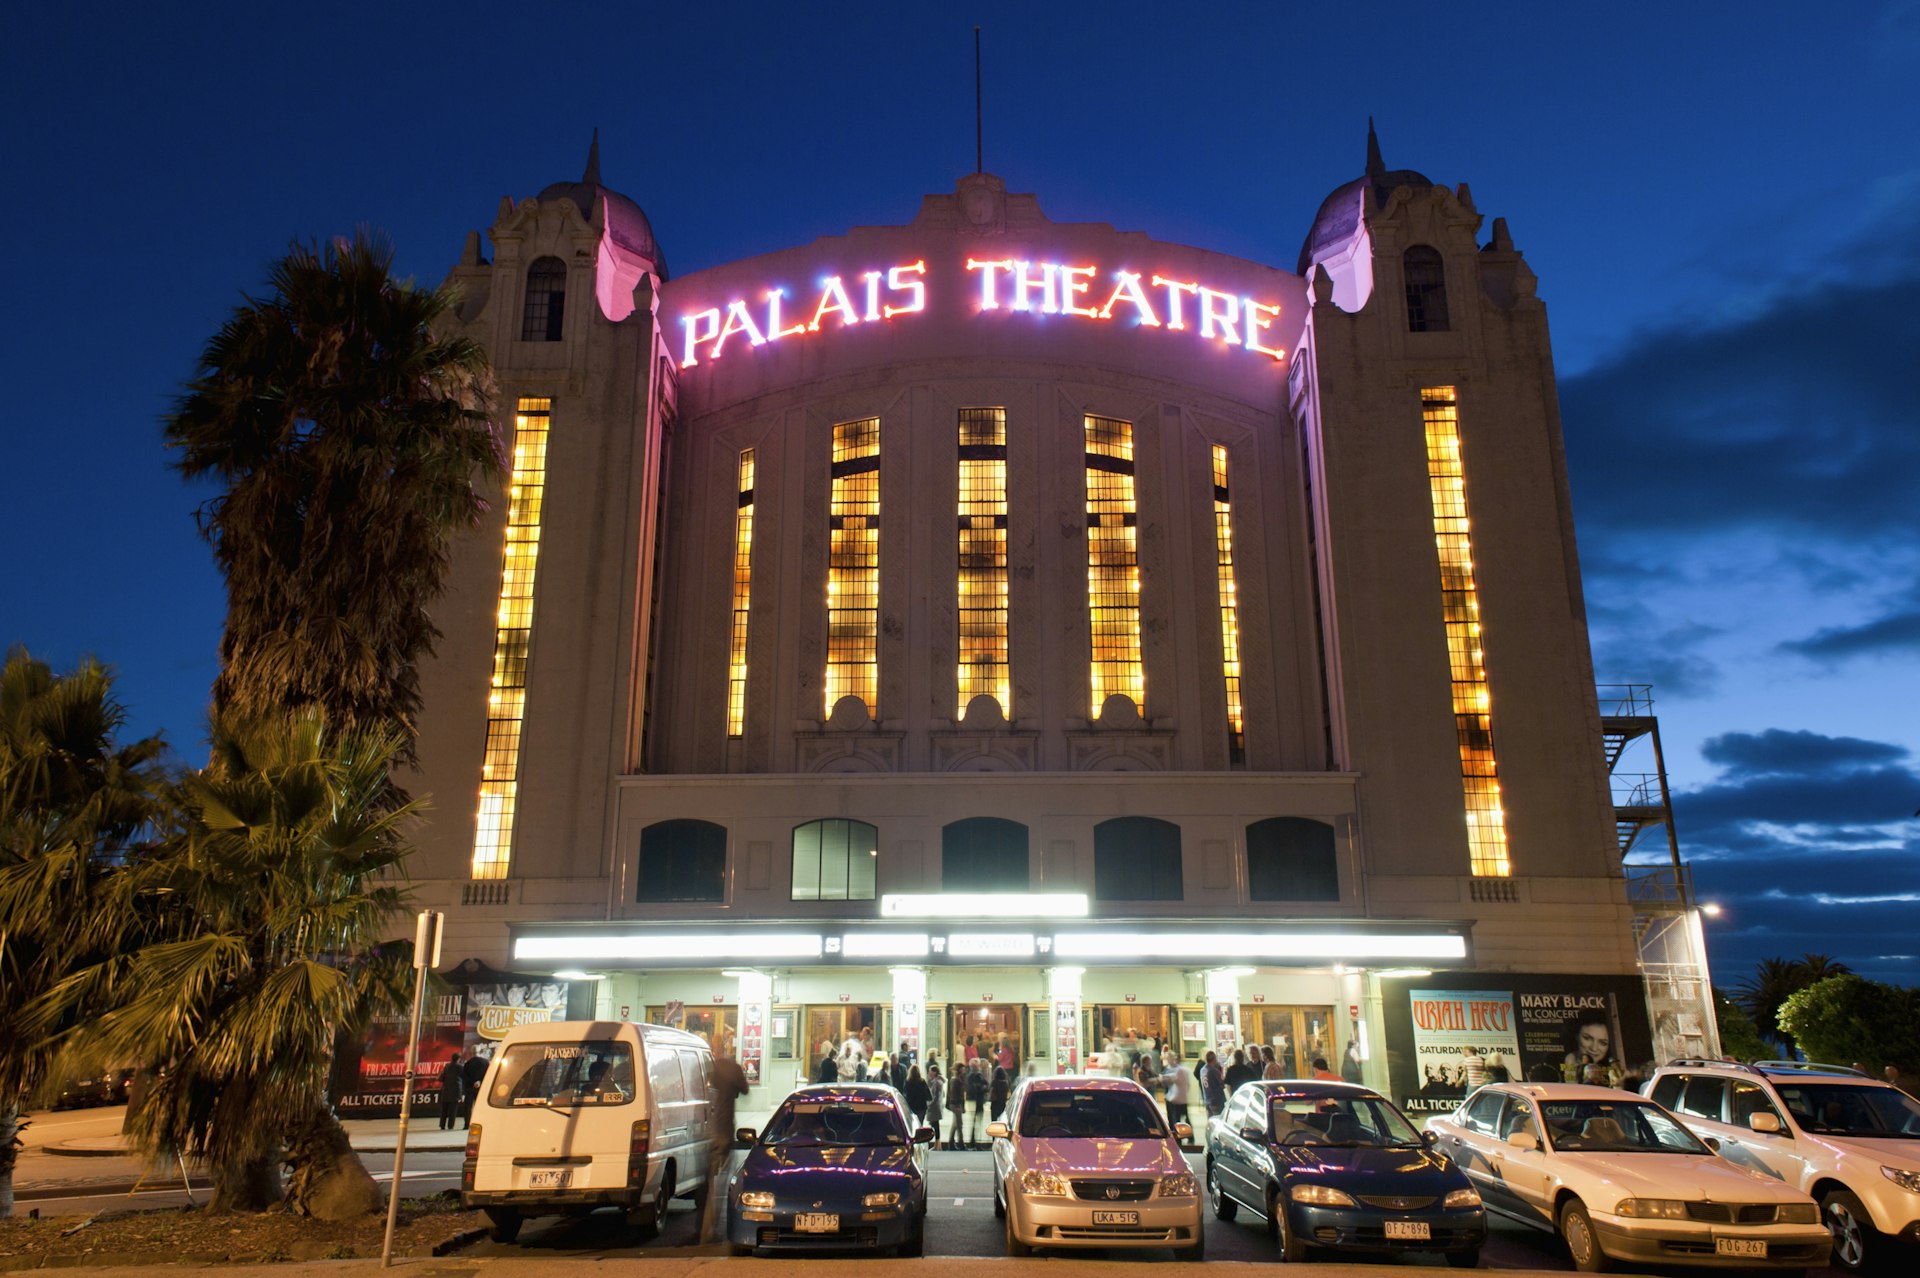 Facade of the Palais Theatre Melbourne credit Richard Nebesky / Getty Images